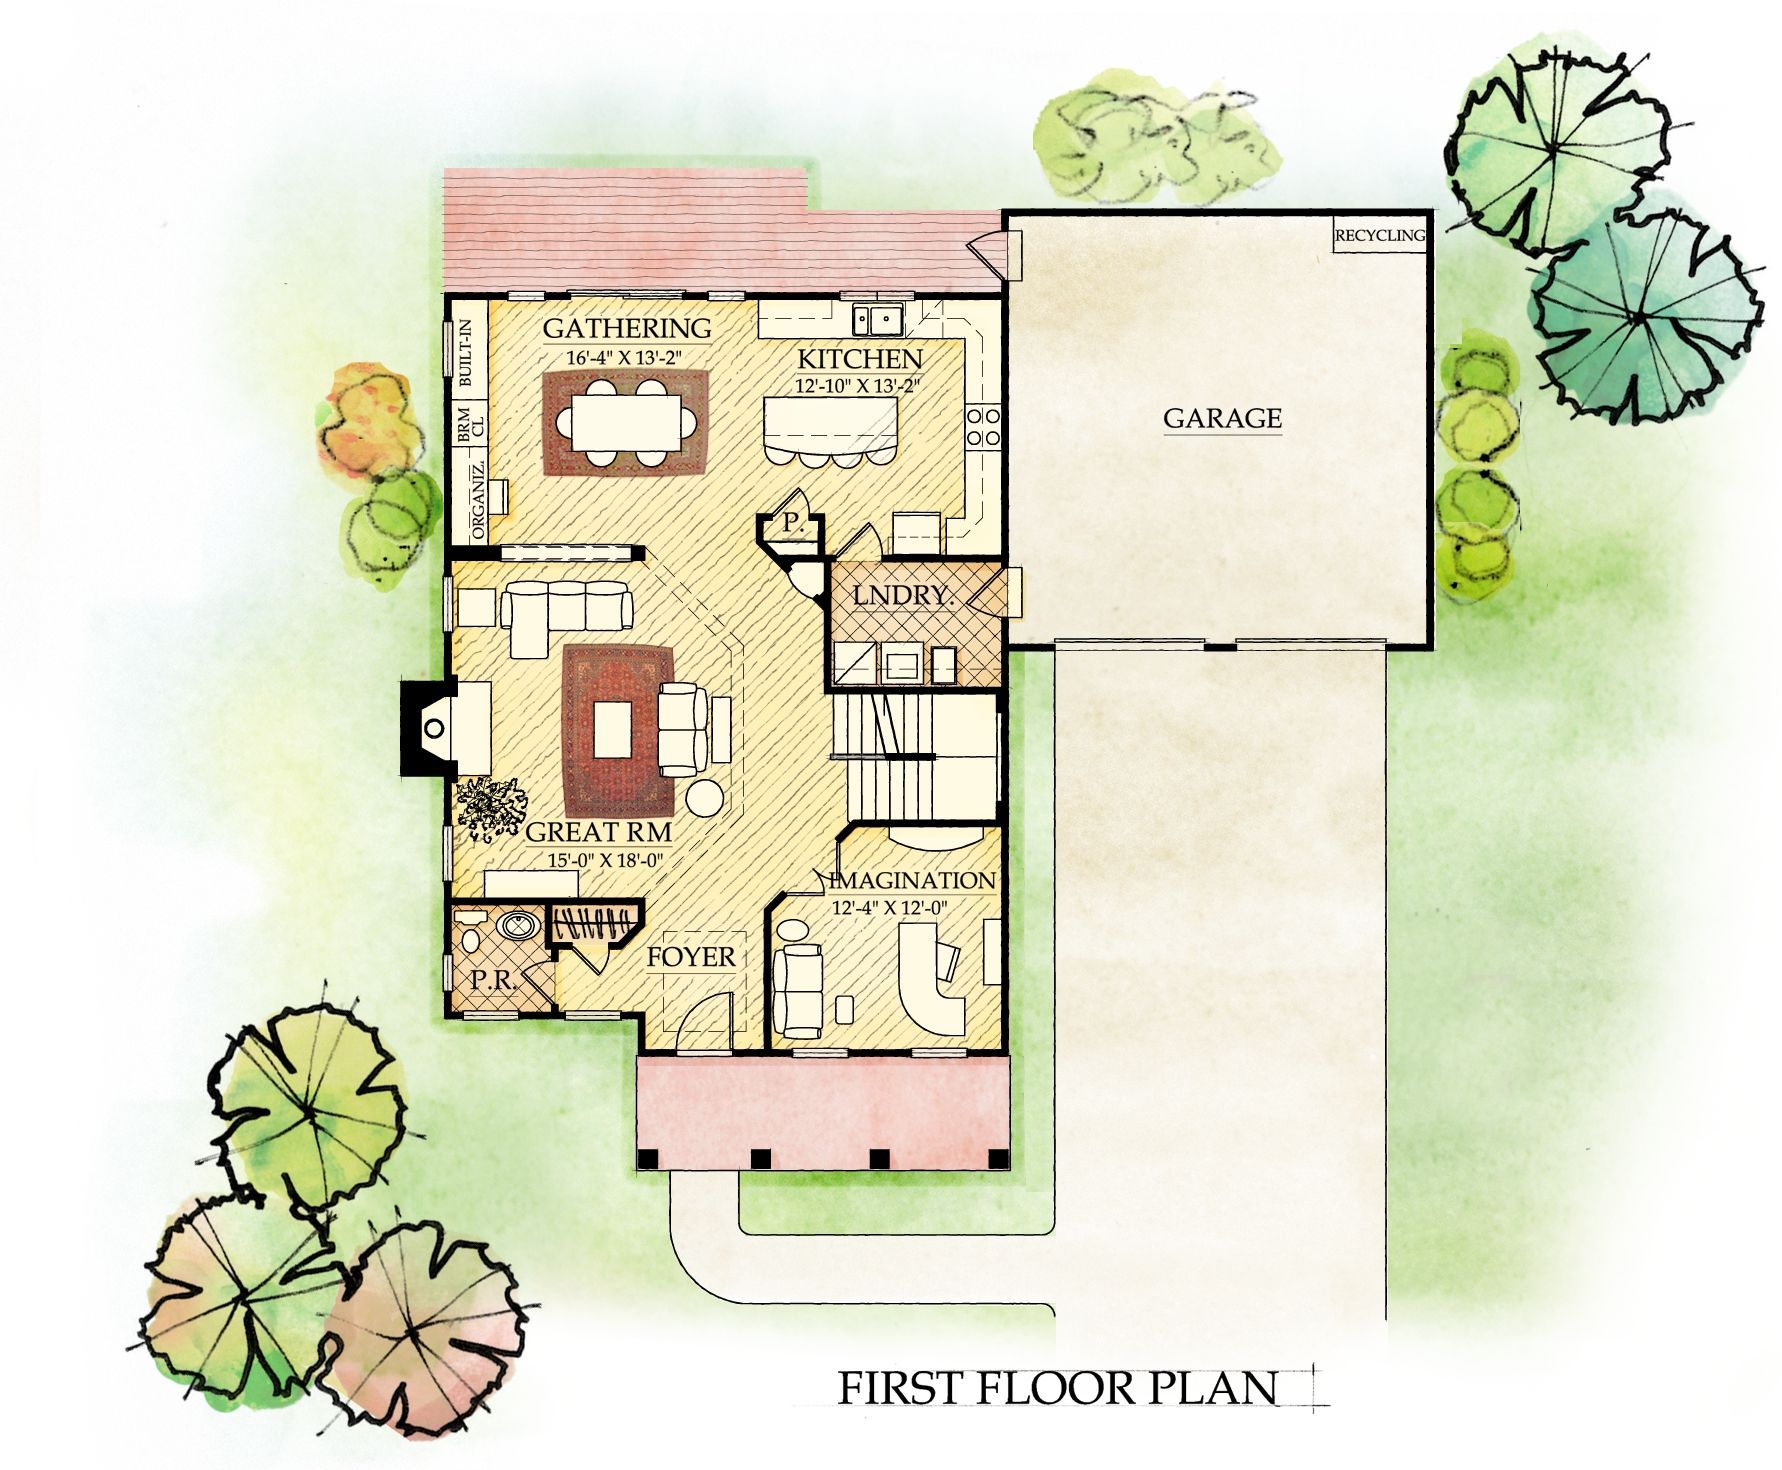 a first floor plan of a house with a garage